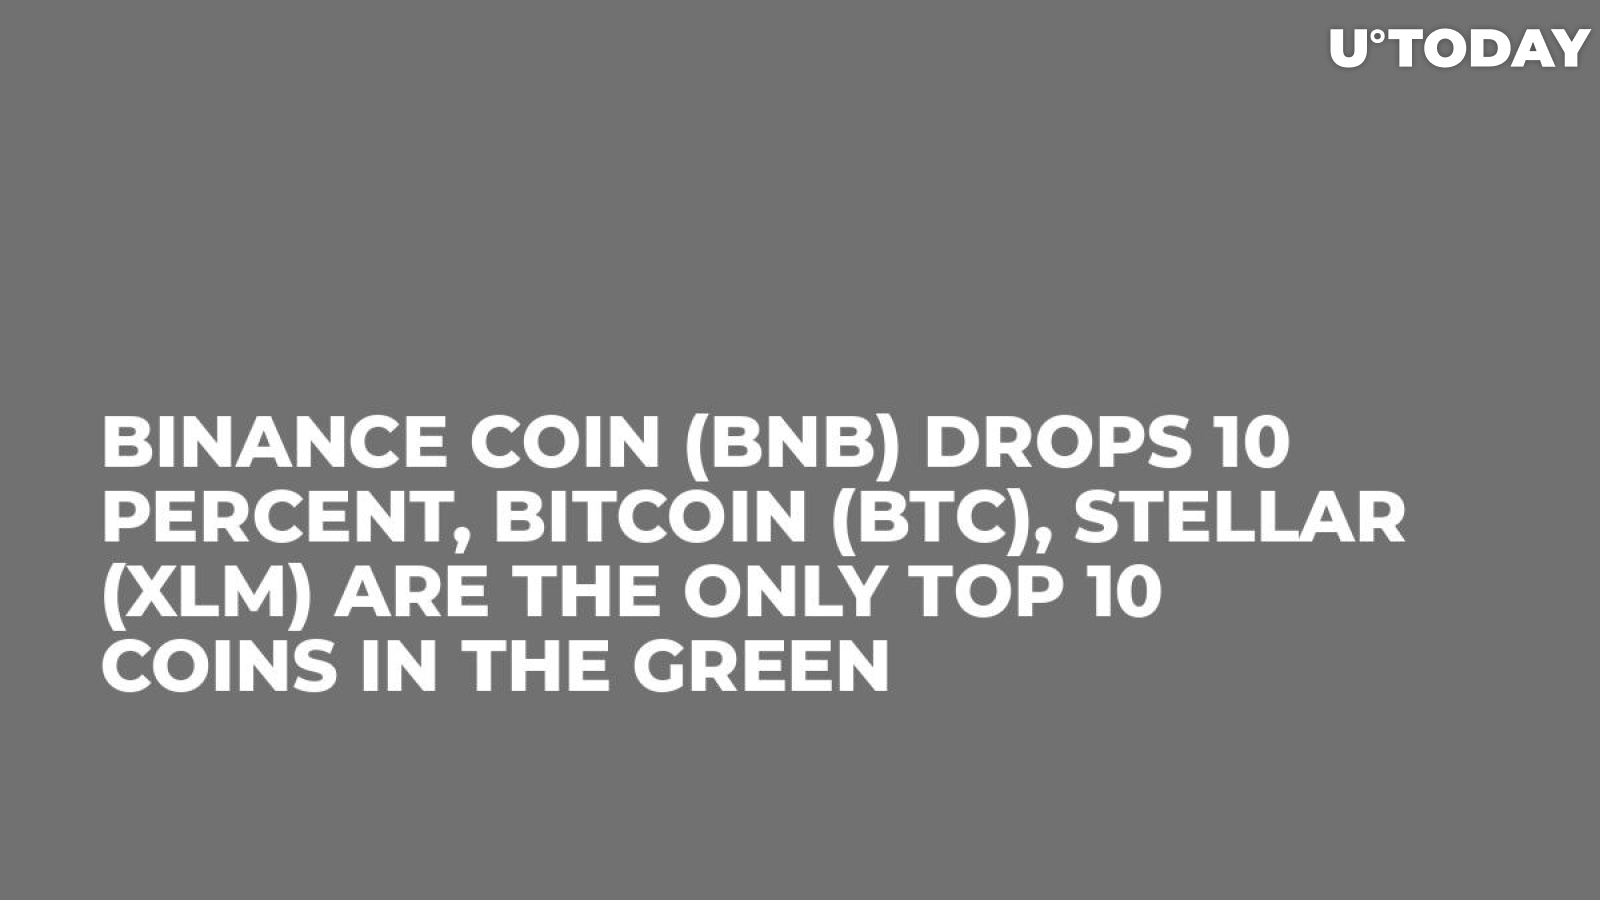 Binance Coin (BNB) Drops 10 Percent, Bitcoin (BTC), Stellar (XLM) Are the Only Top 10 Coins in the Green 